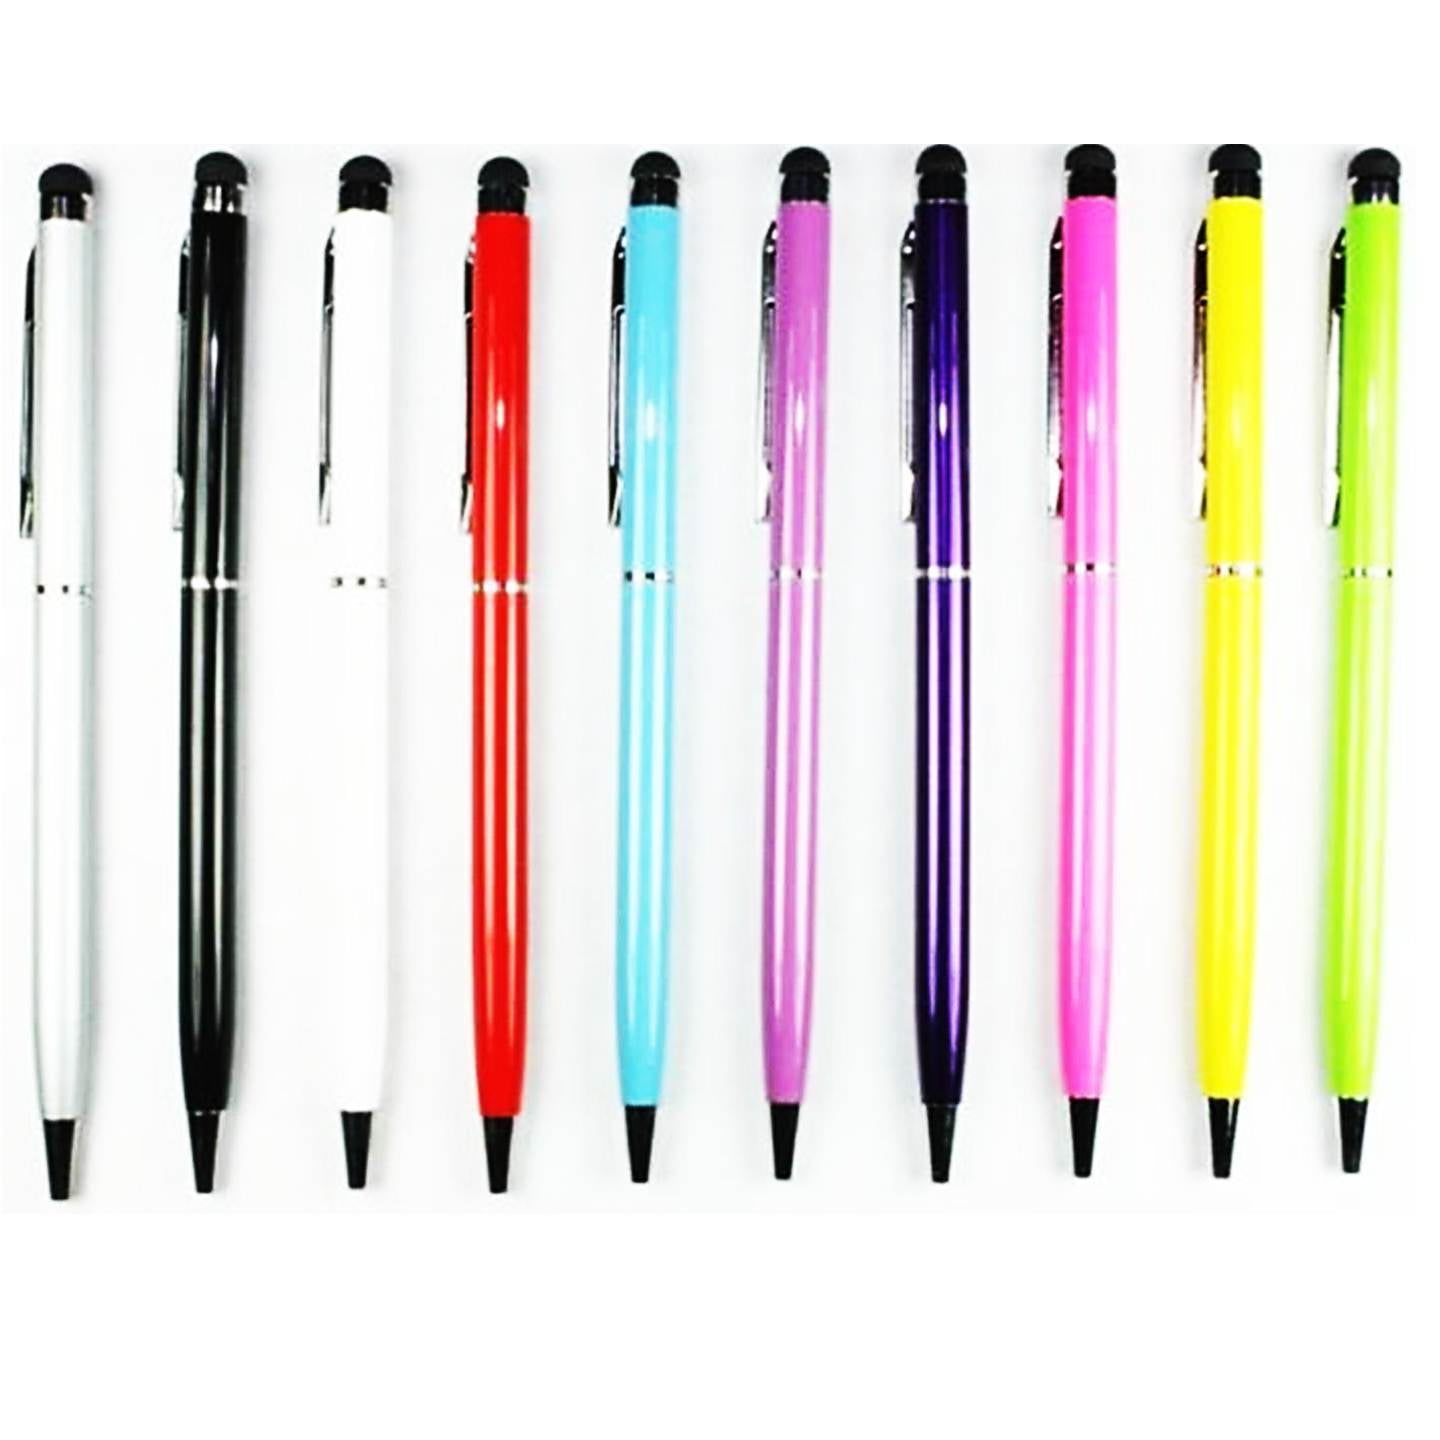 2in1 Pink Touch Screen Stylus Pen For iPhone iPad Smartphones Tablets Universal 